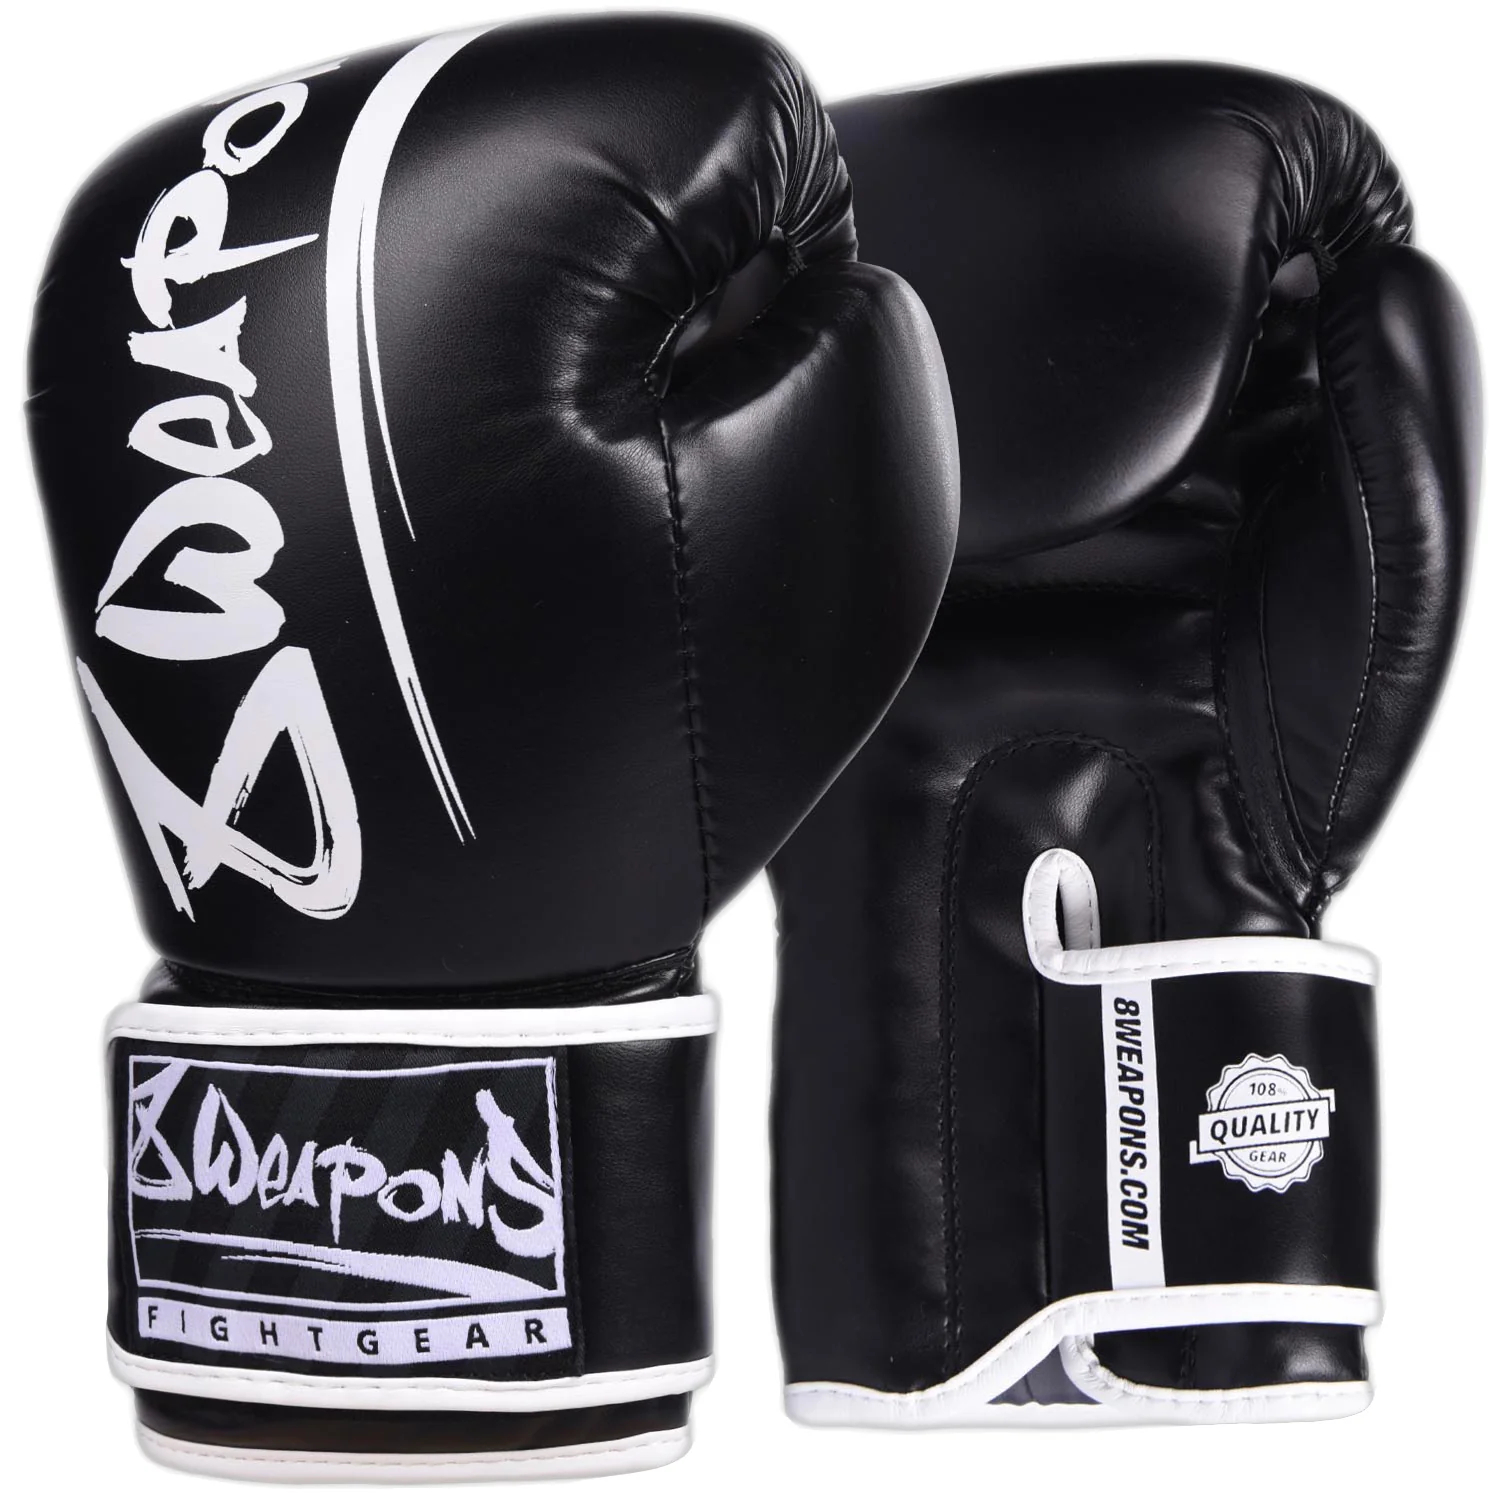 8 Weapons Unlimited Muay Thai Boxing Gloves - Black/White - Click Image to Close